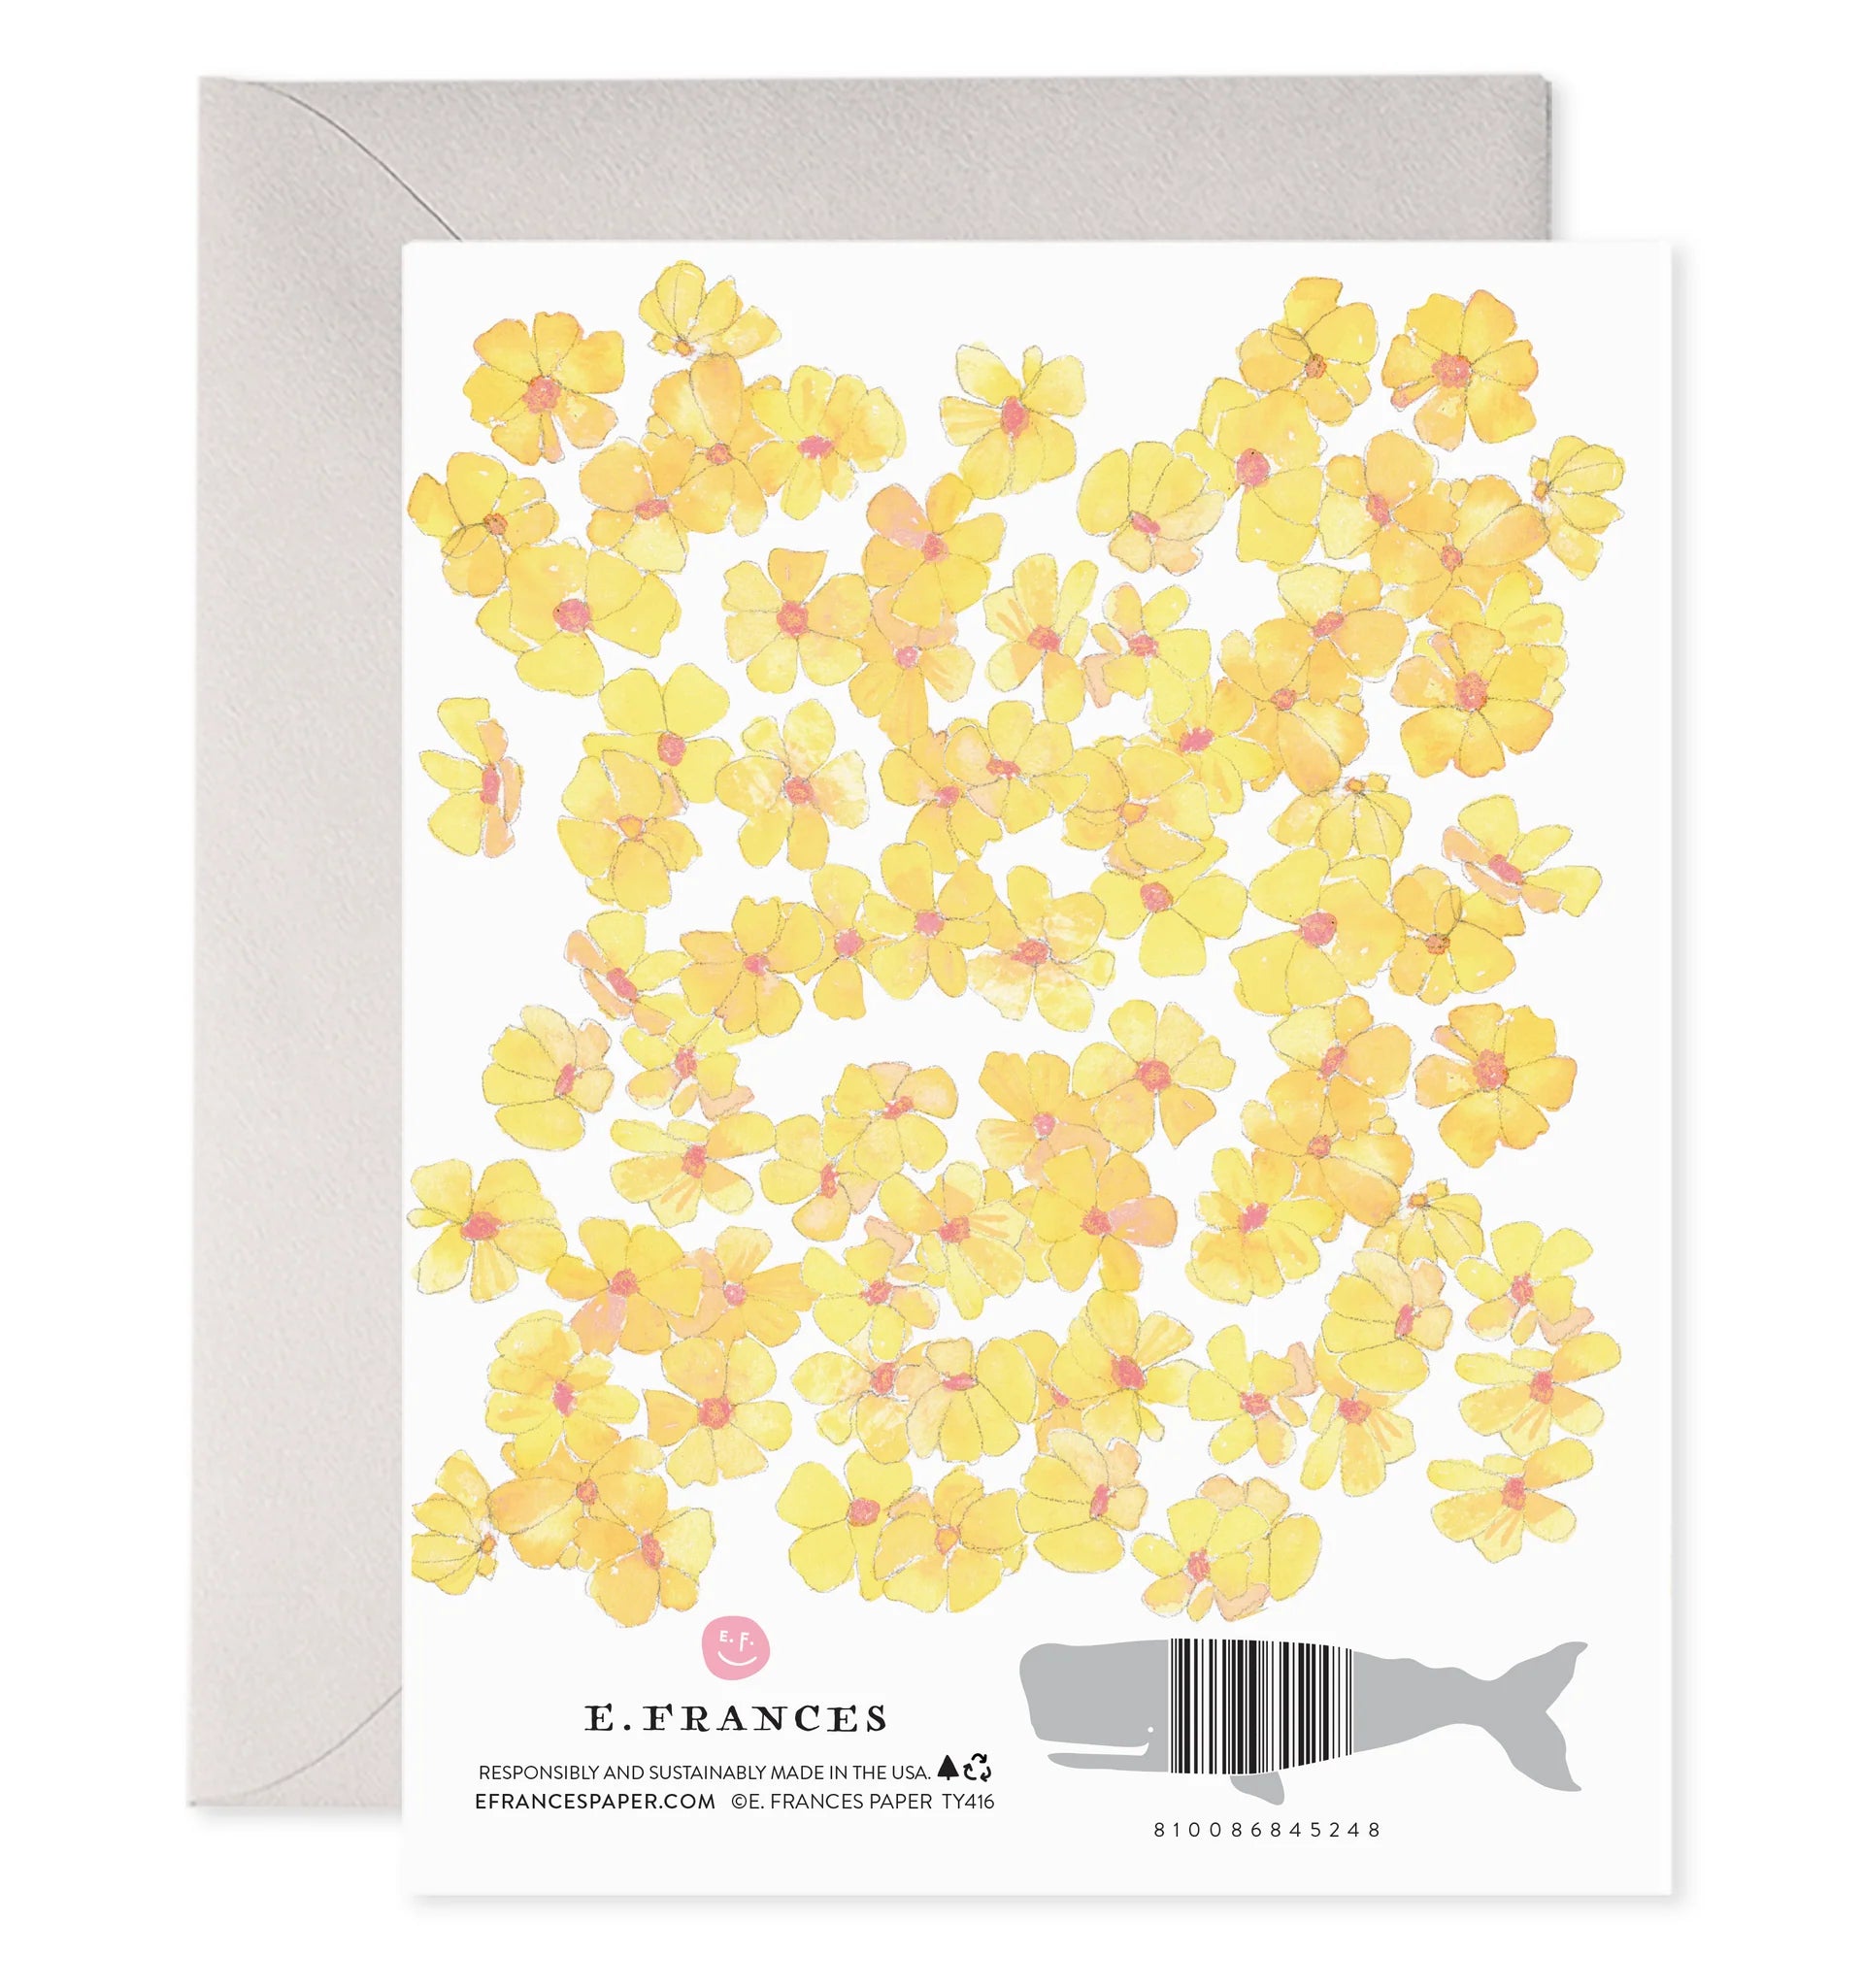 Yellow Flowers Thank You Greeting Card